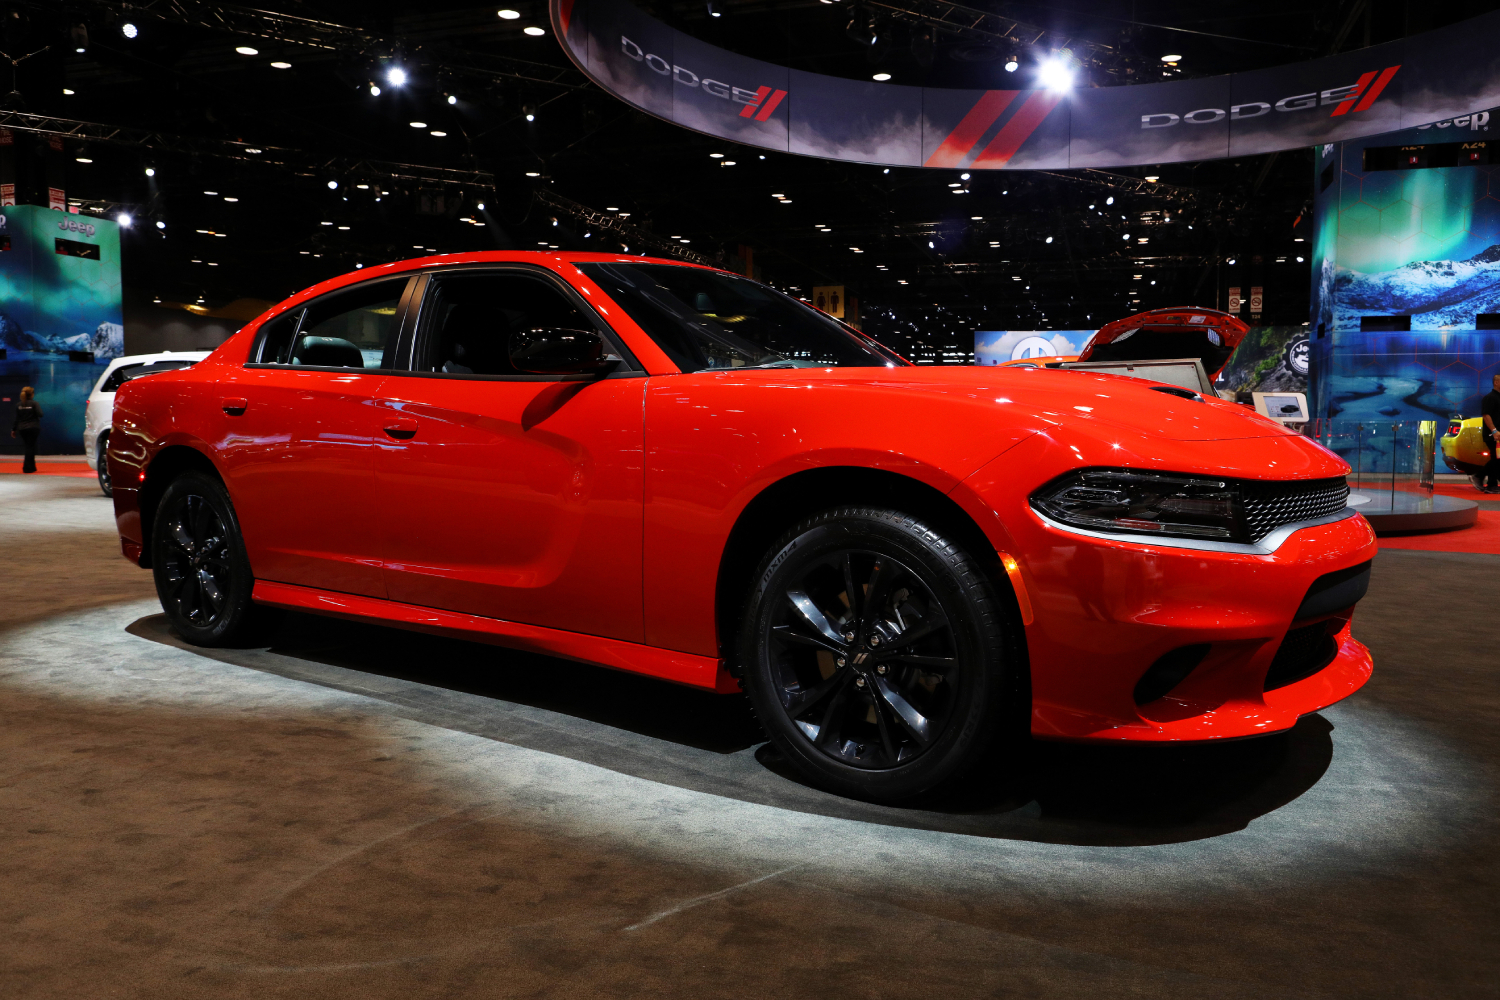 A Dodge Charger sits on display at an auto show